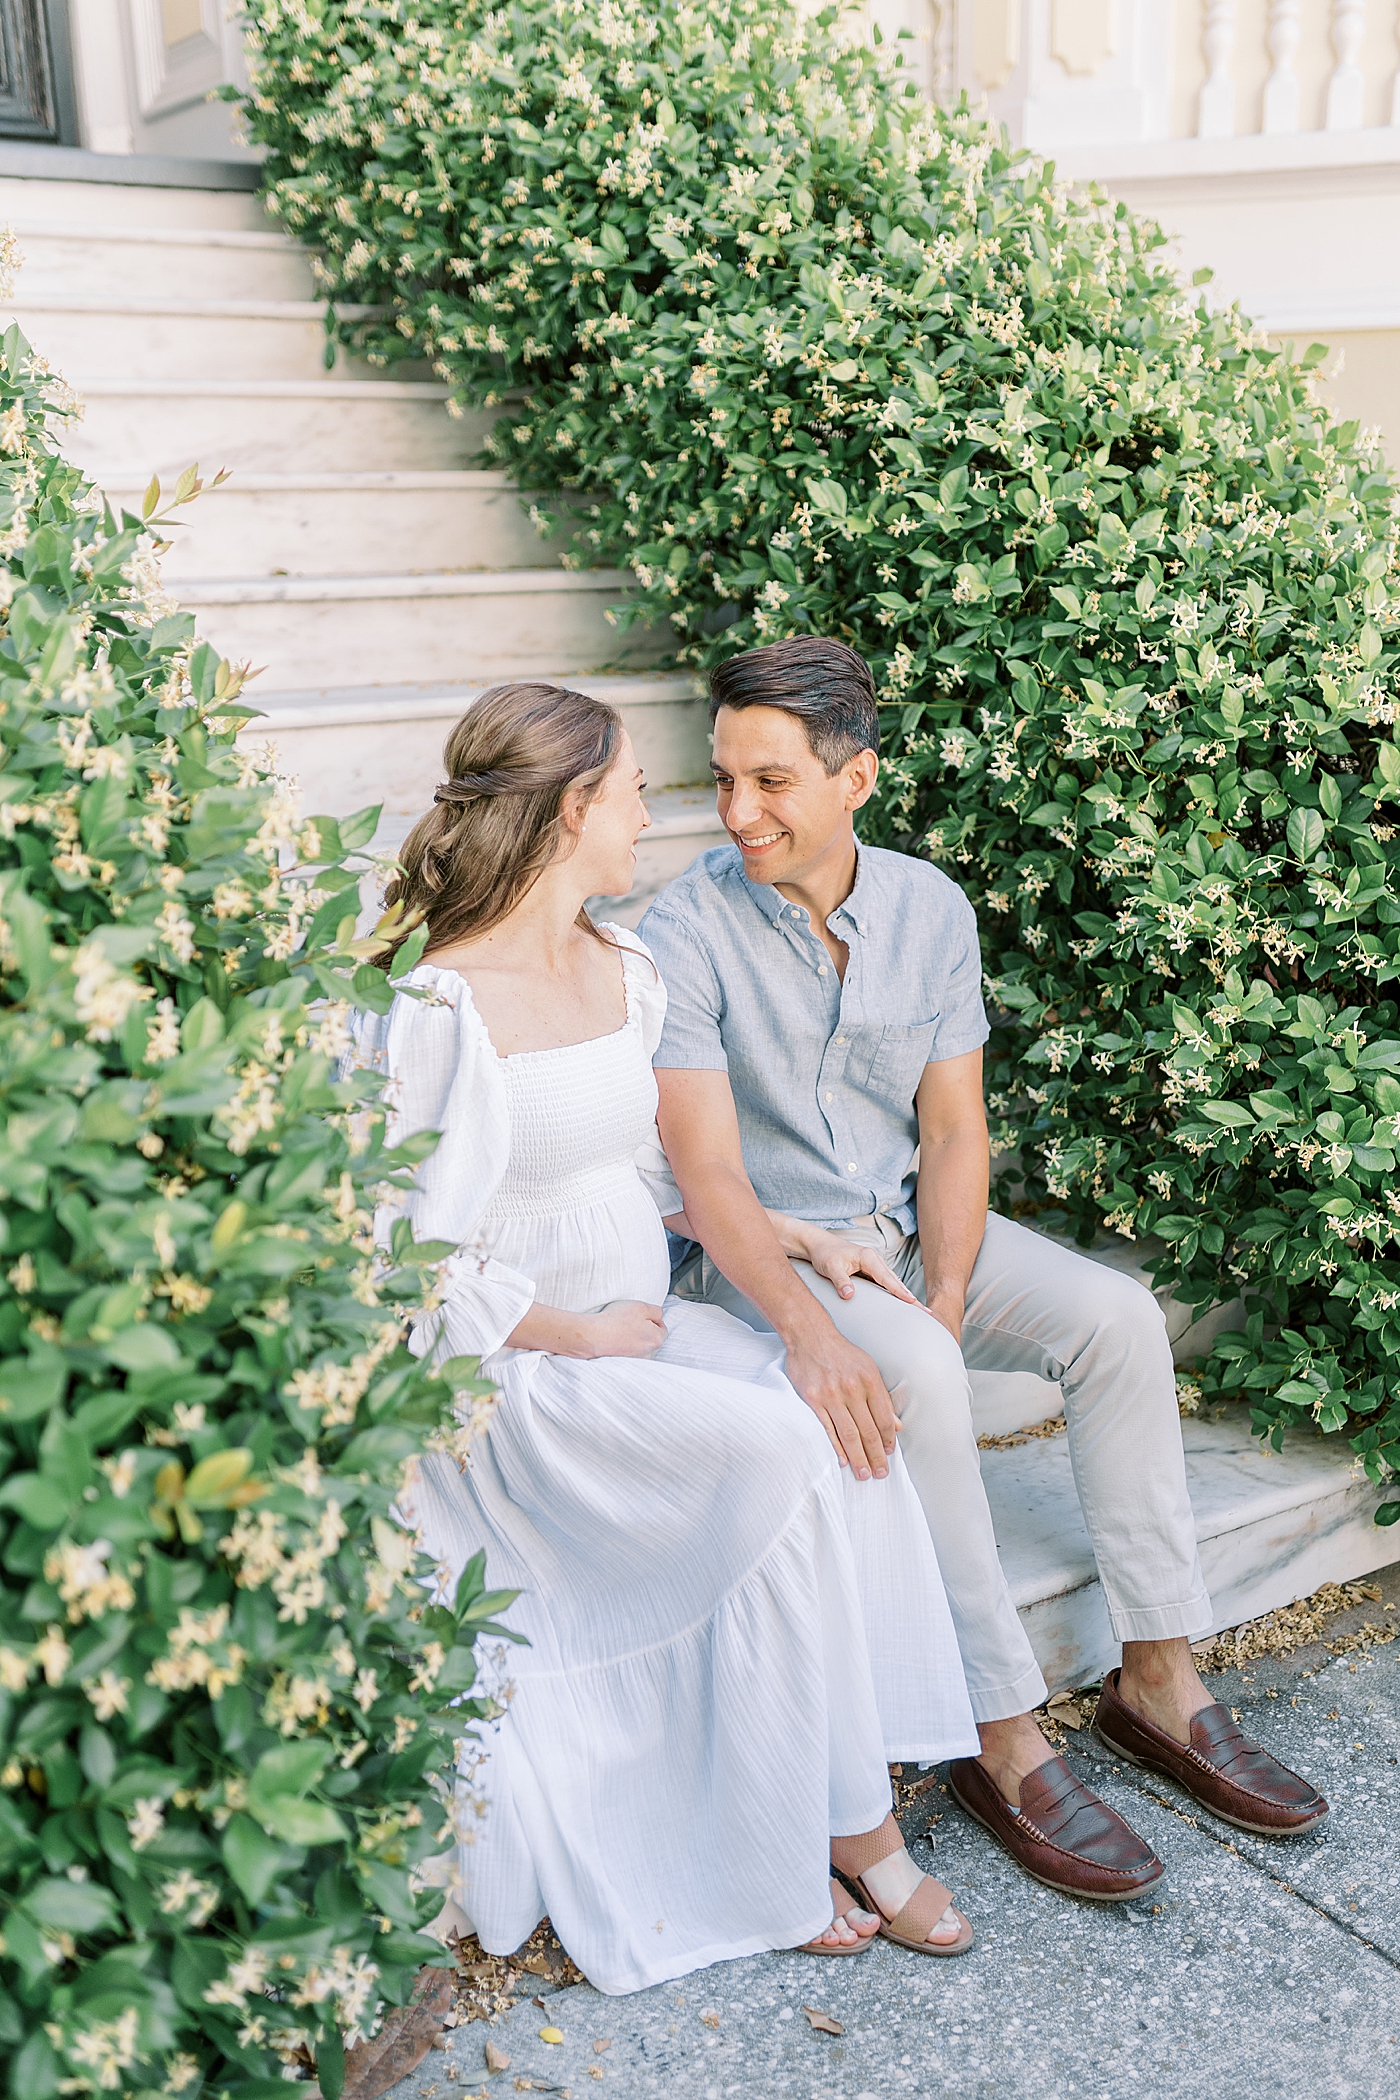 Mom and dad to be sitting on steps surrounded by jasmine | Photo by Charleston Film Photographer Caitlyn Motycka